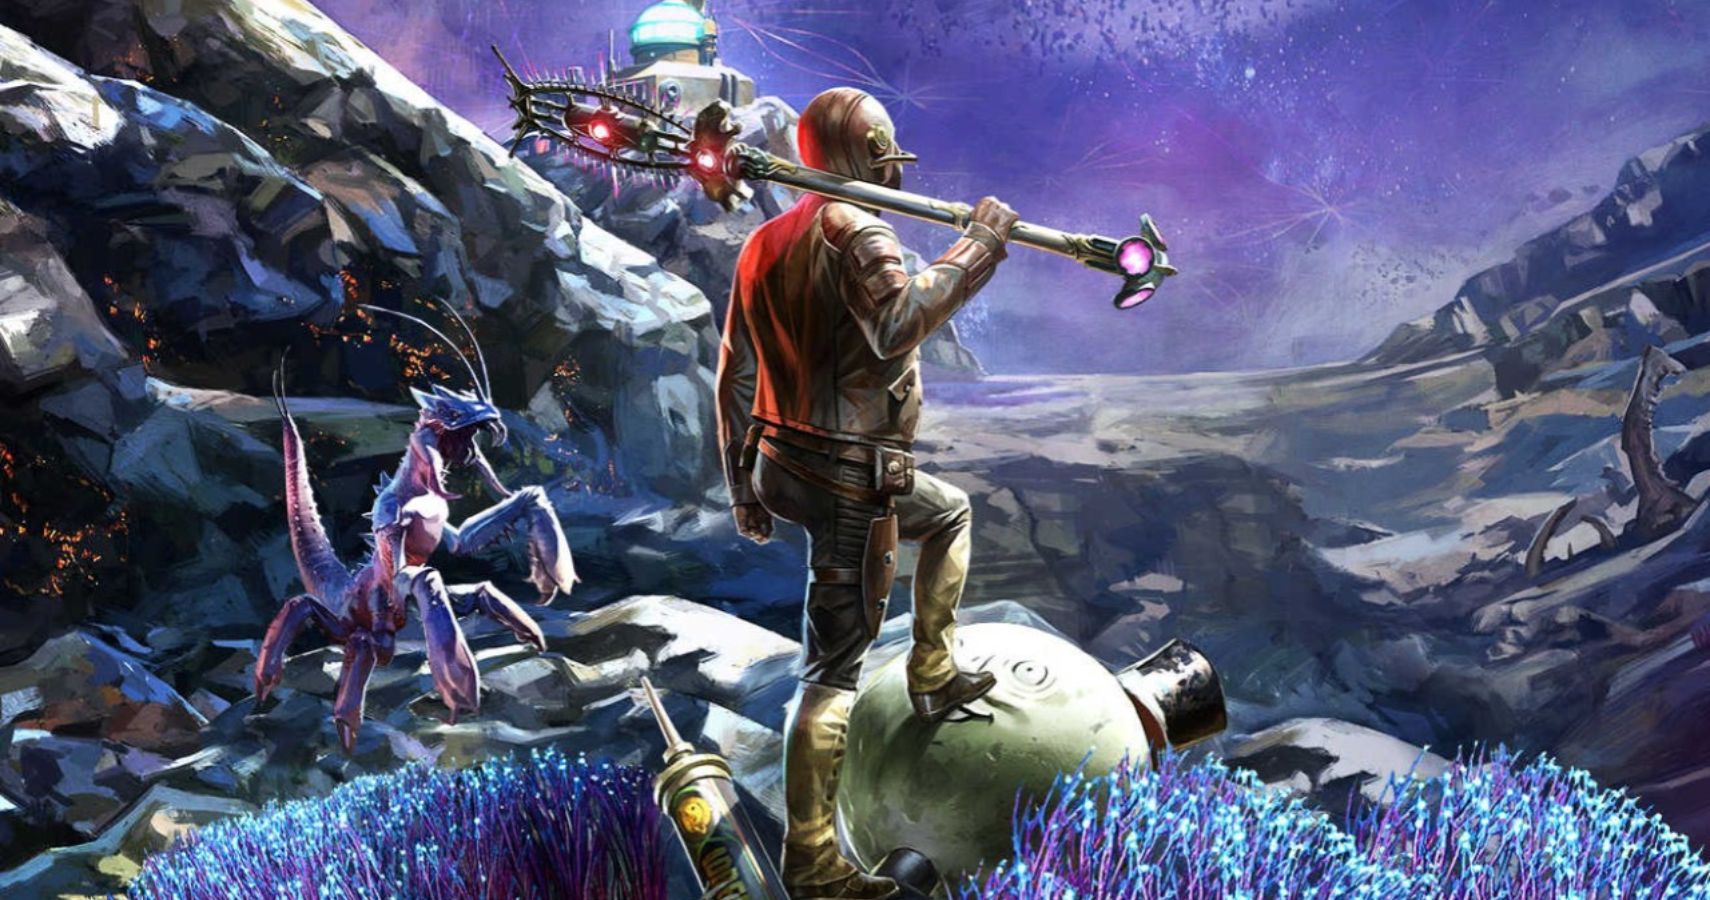 the outer worlds release date switch